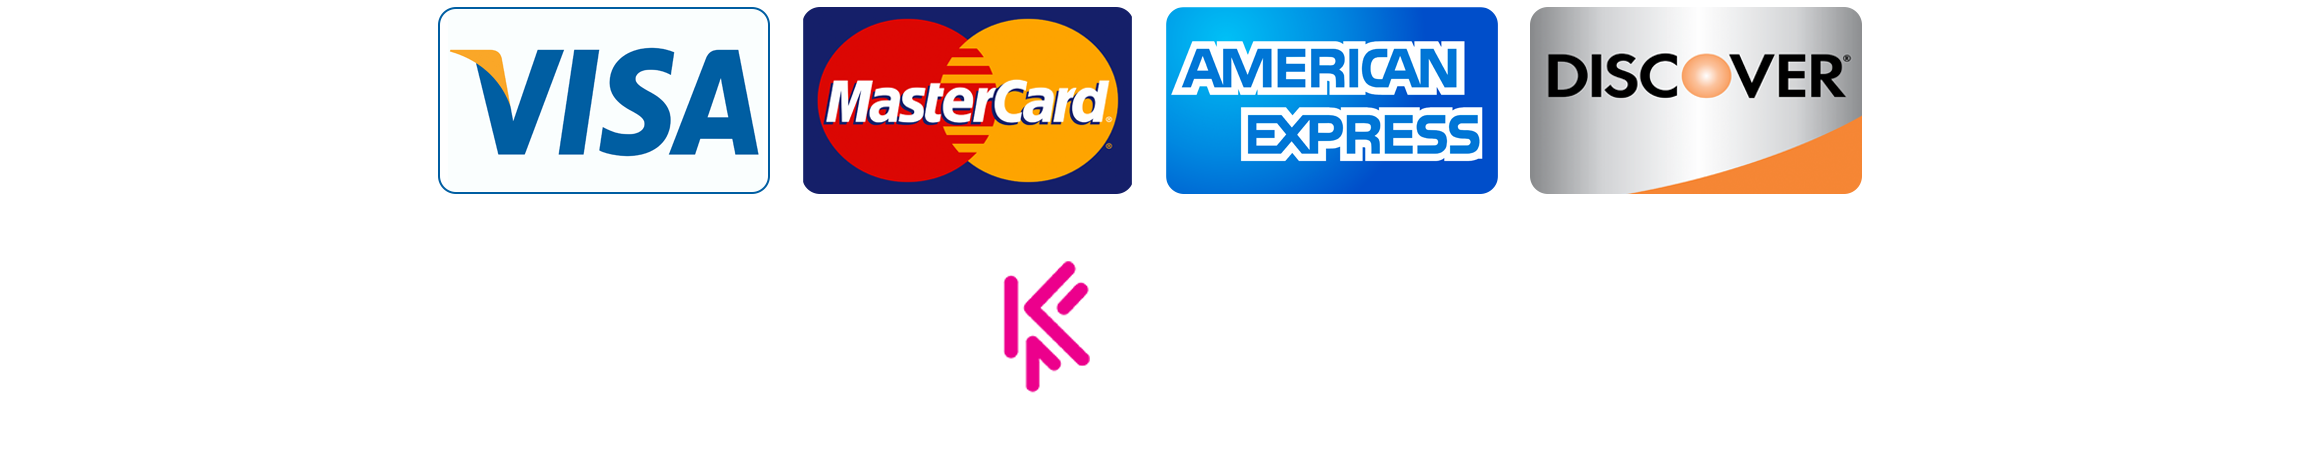 Direct purchase cards